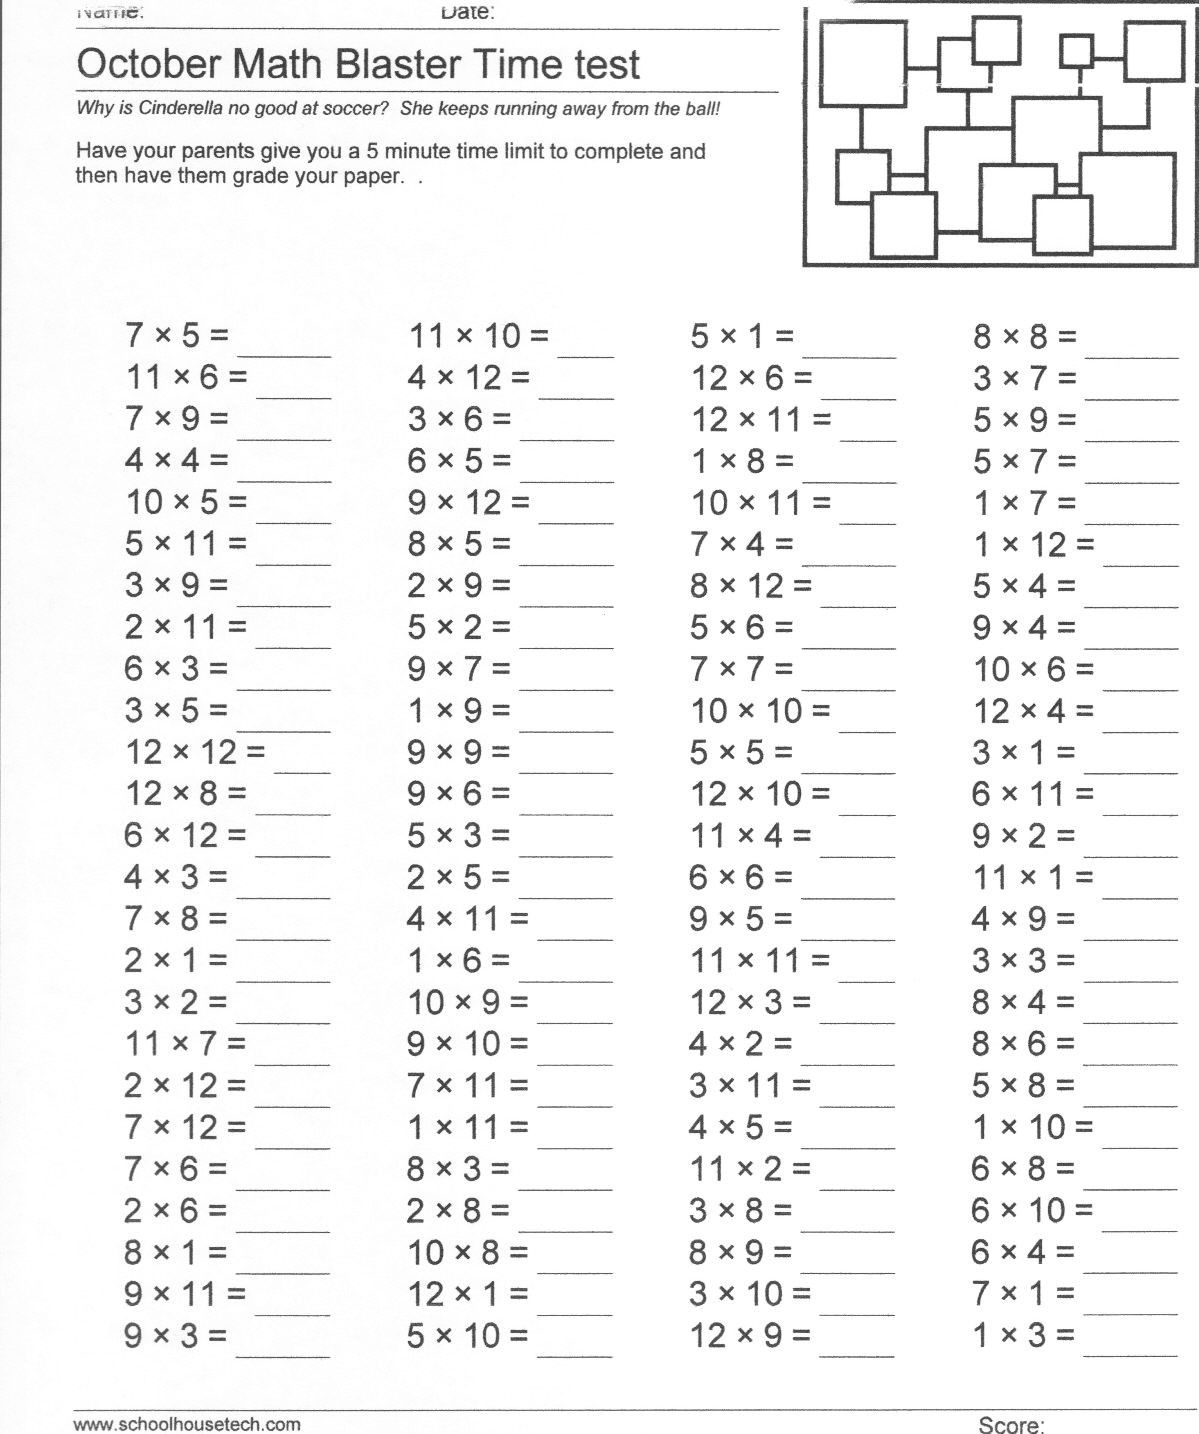 free-printable-color-by-number-multiplication-worksheets-times-tables-multiplication-practice